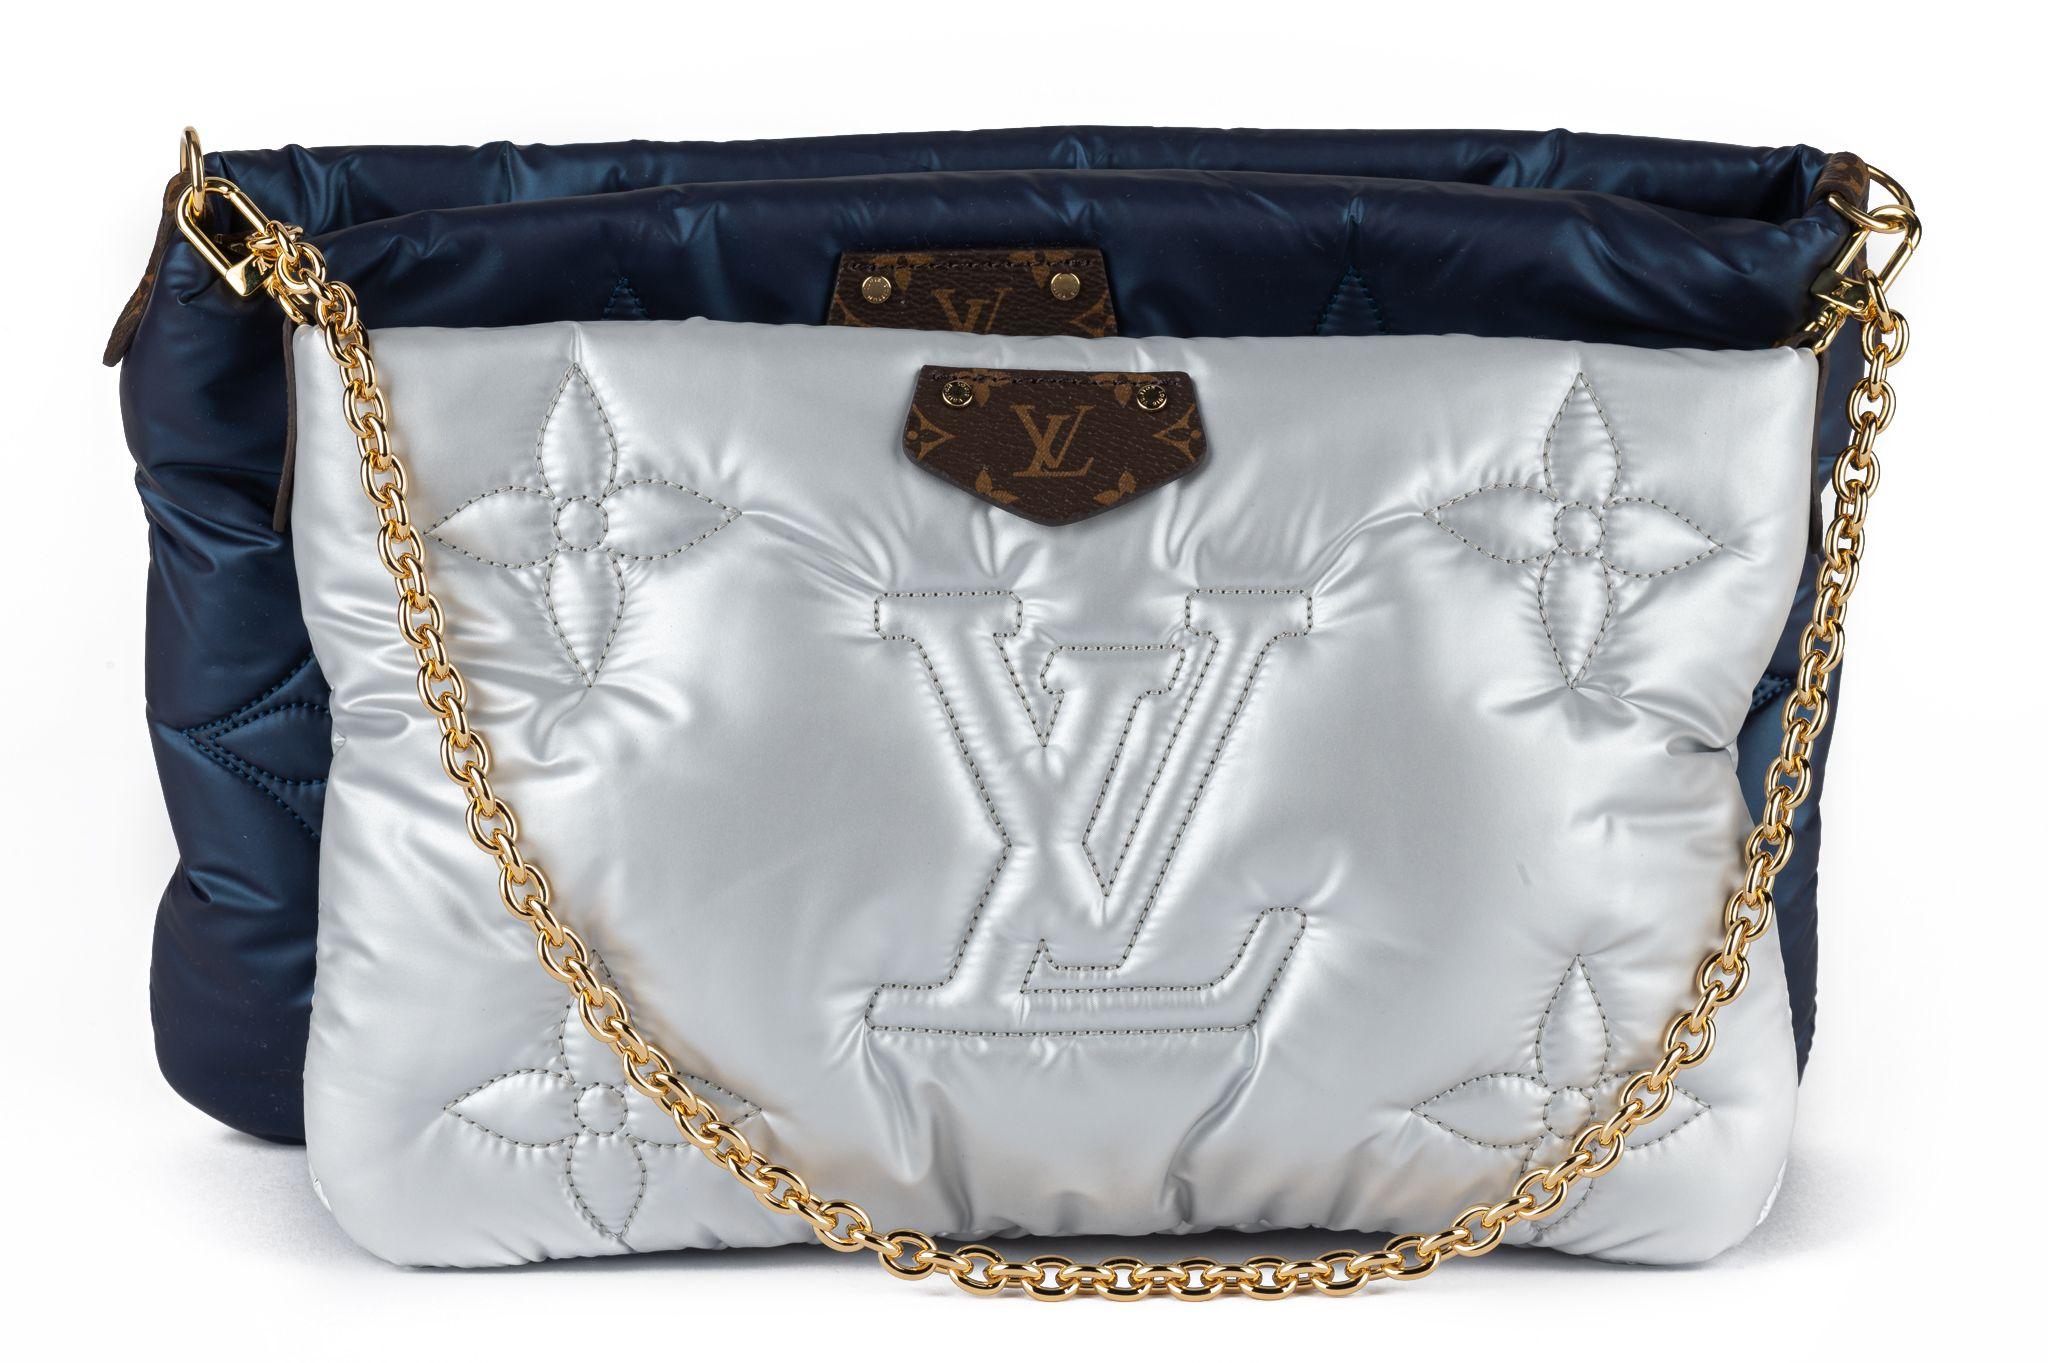 Louis Vuitton new Pillow capsule collection maxi multi pochette, blue and silver . The two bags can be worn separately. Detachable and adjustable Shoulder strap 13,5” ; shoulder strap chain 9.5” Comes with original dustcover and box.